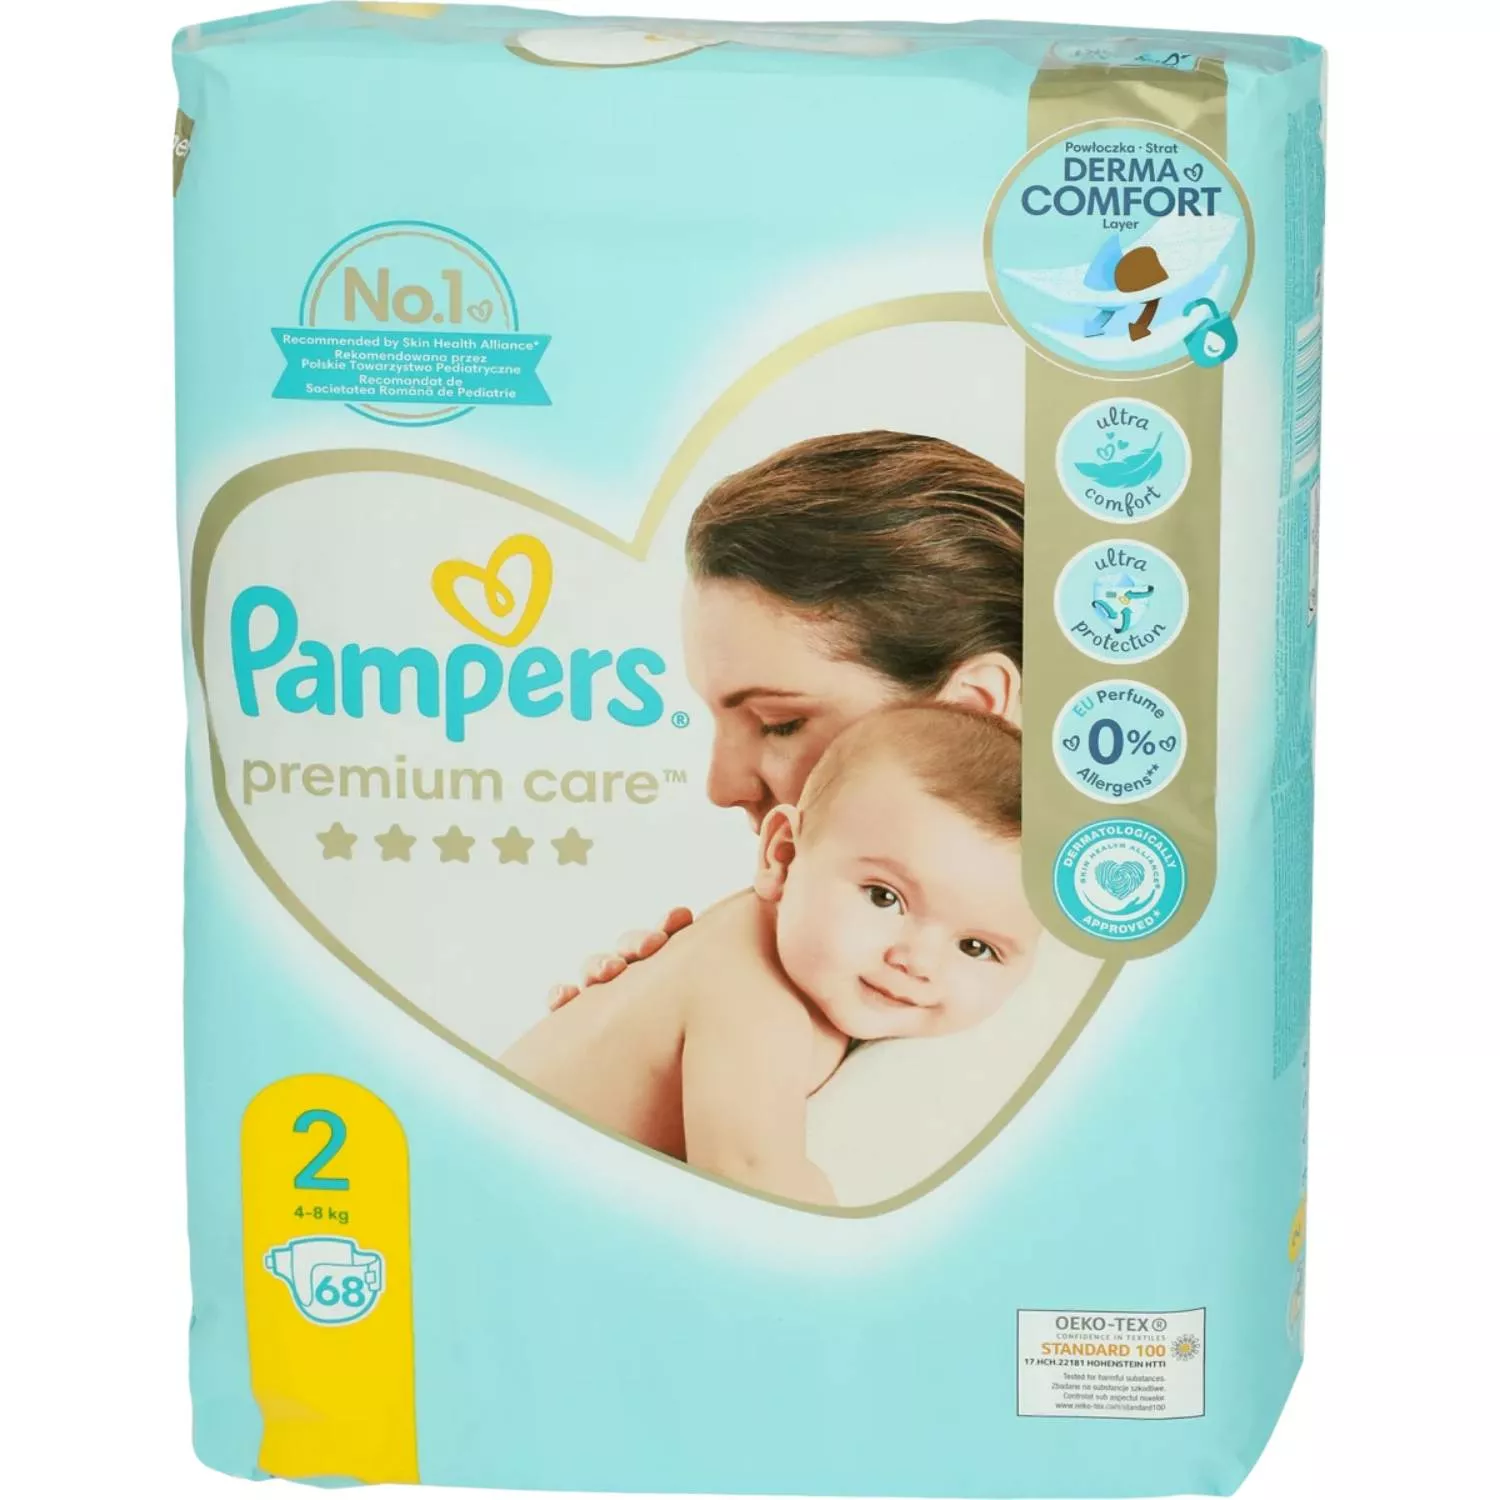 canon ipf605 pampers